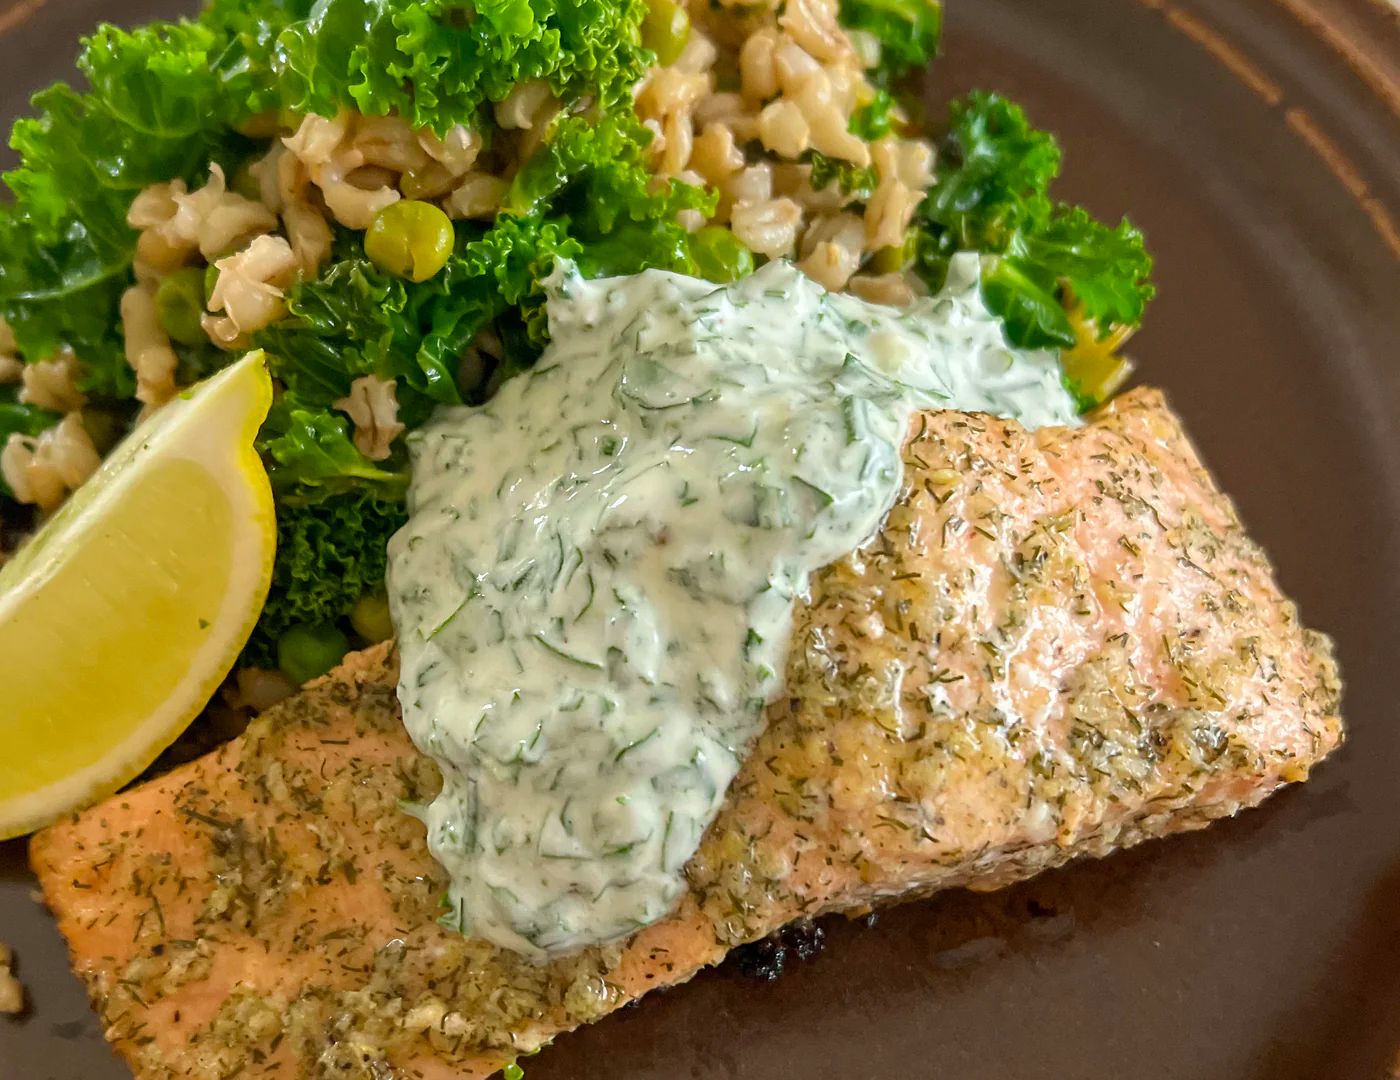 Feed my skin with Jette Saunders!   Baked salmon and greens with herby greek yoghurt sauce